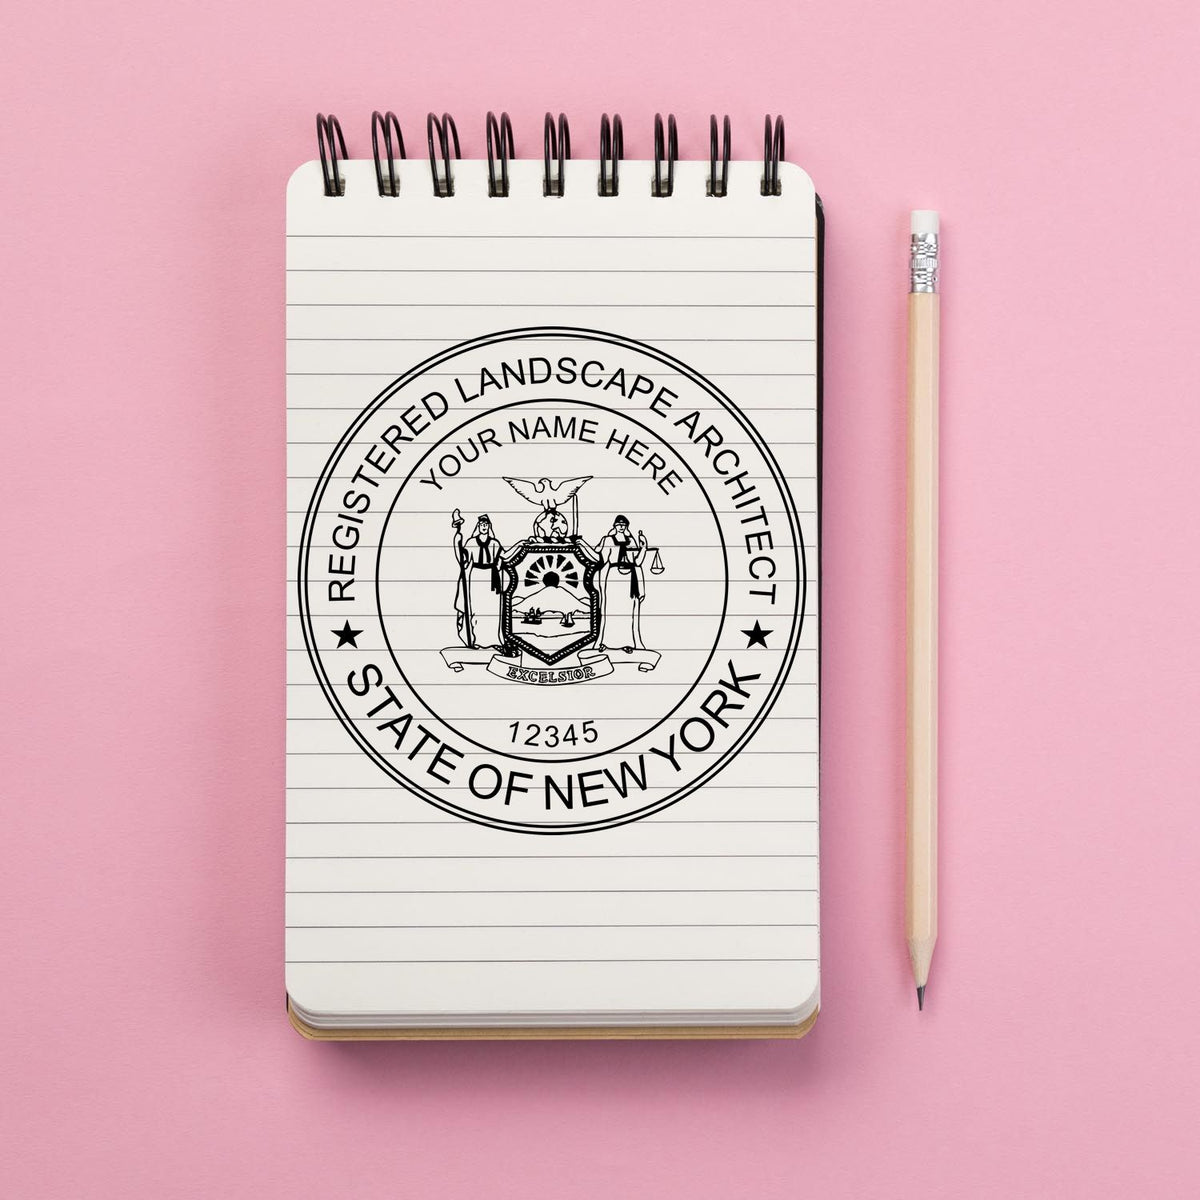 This paper is stamped with a sample imprint of the Slim Pre-Inked New York Landscape Architect Seal Stamp, signifying its quality and reliability.